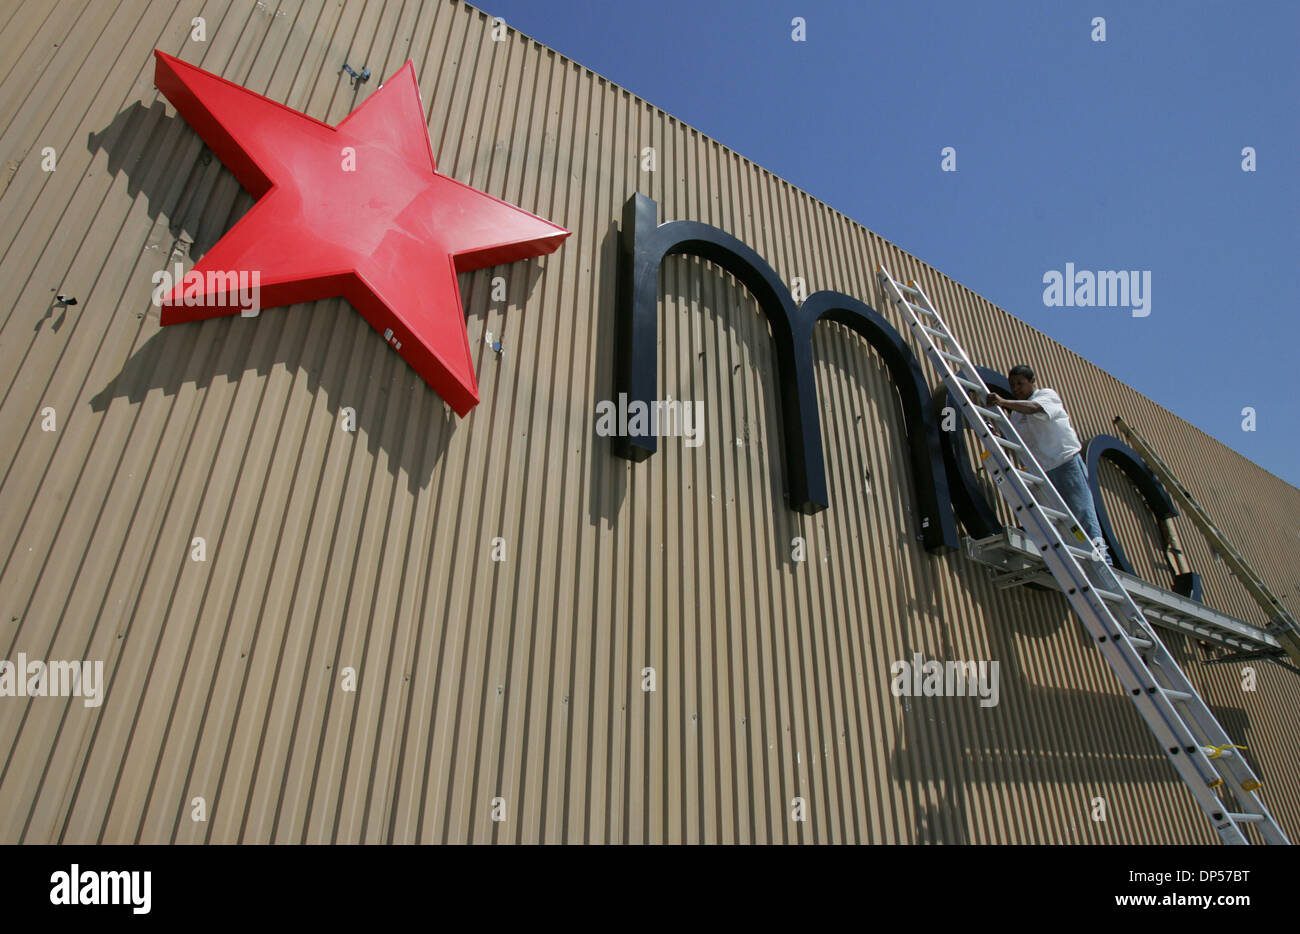 Sep 06, 2006; San Diego, CA, USA; Sign Method Electrical Sign & Neon (from Long Beach) employee Enrique Ramirez works on installing a  Macy's sign where the Robinsons May sign use to be at Westfield Mission Valley.   Mandatory Credit: Photo by John R. McCutchen/SDU-T/ZUMA Press. (©) Copyright 2006 by SDU-T Stock Photo